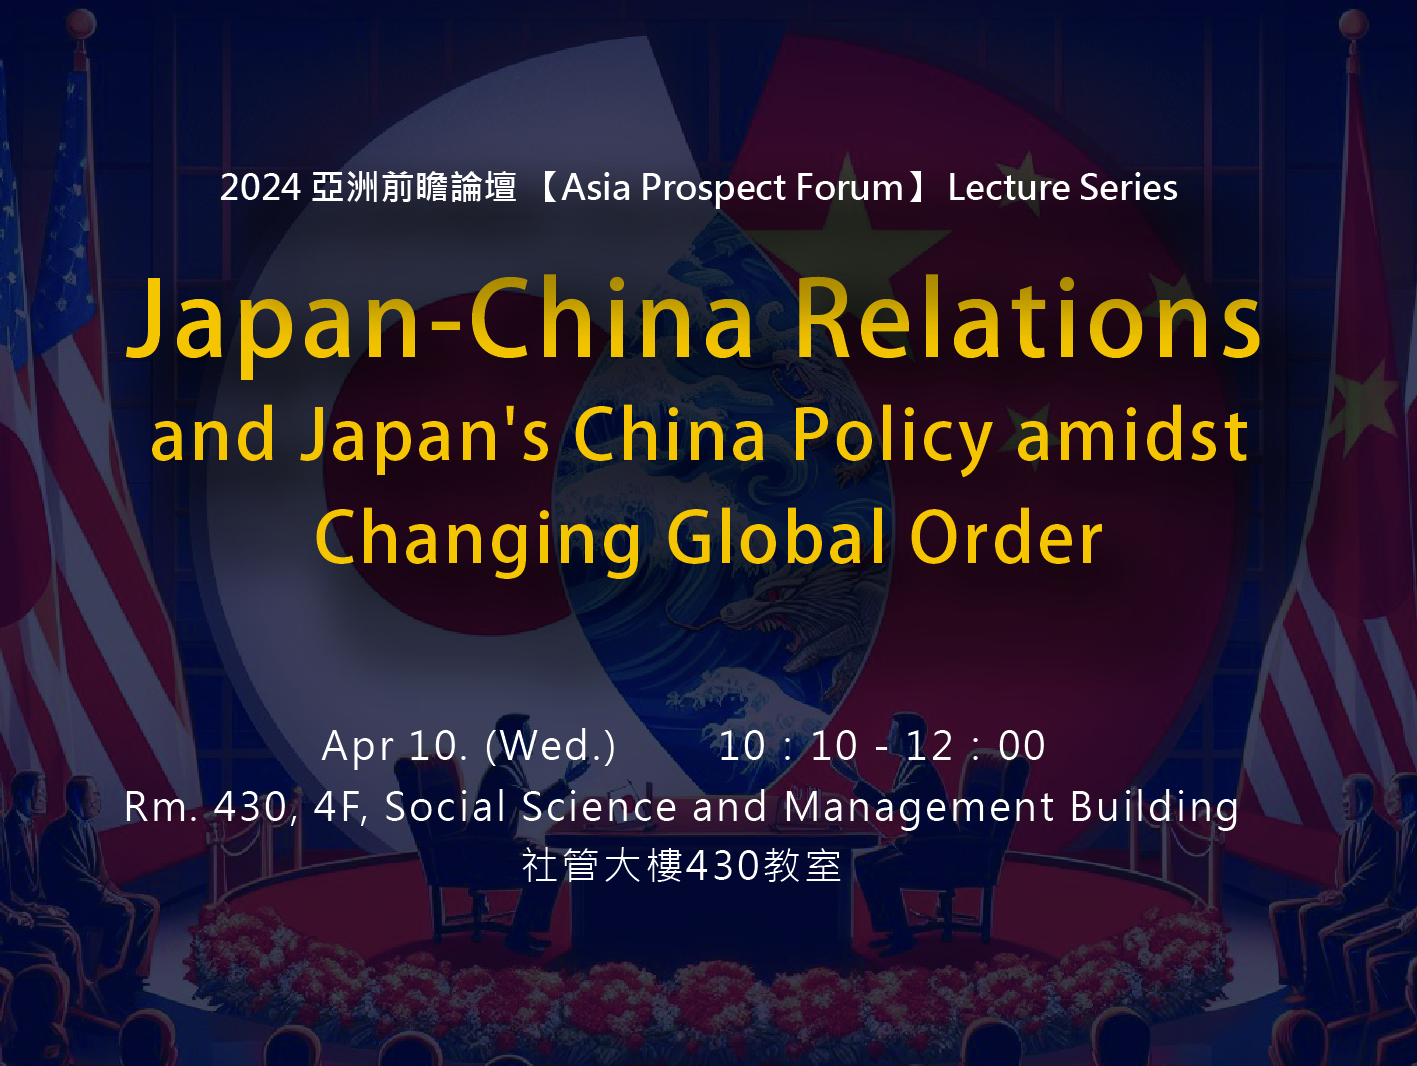 Japan-China Relations and Japan's China Policy amidst Changing Global Order